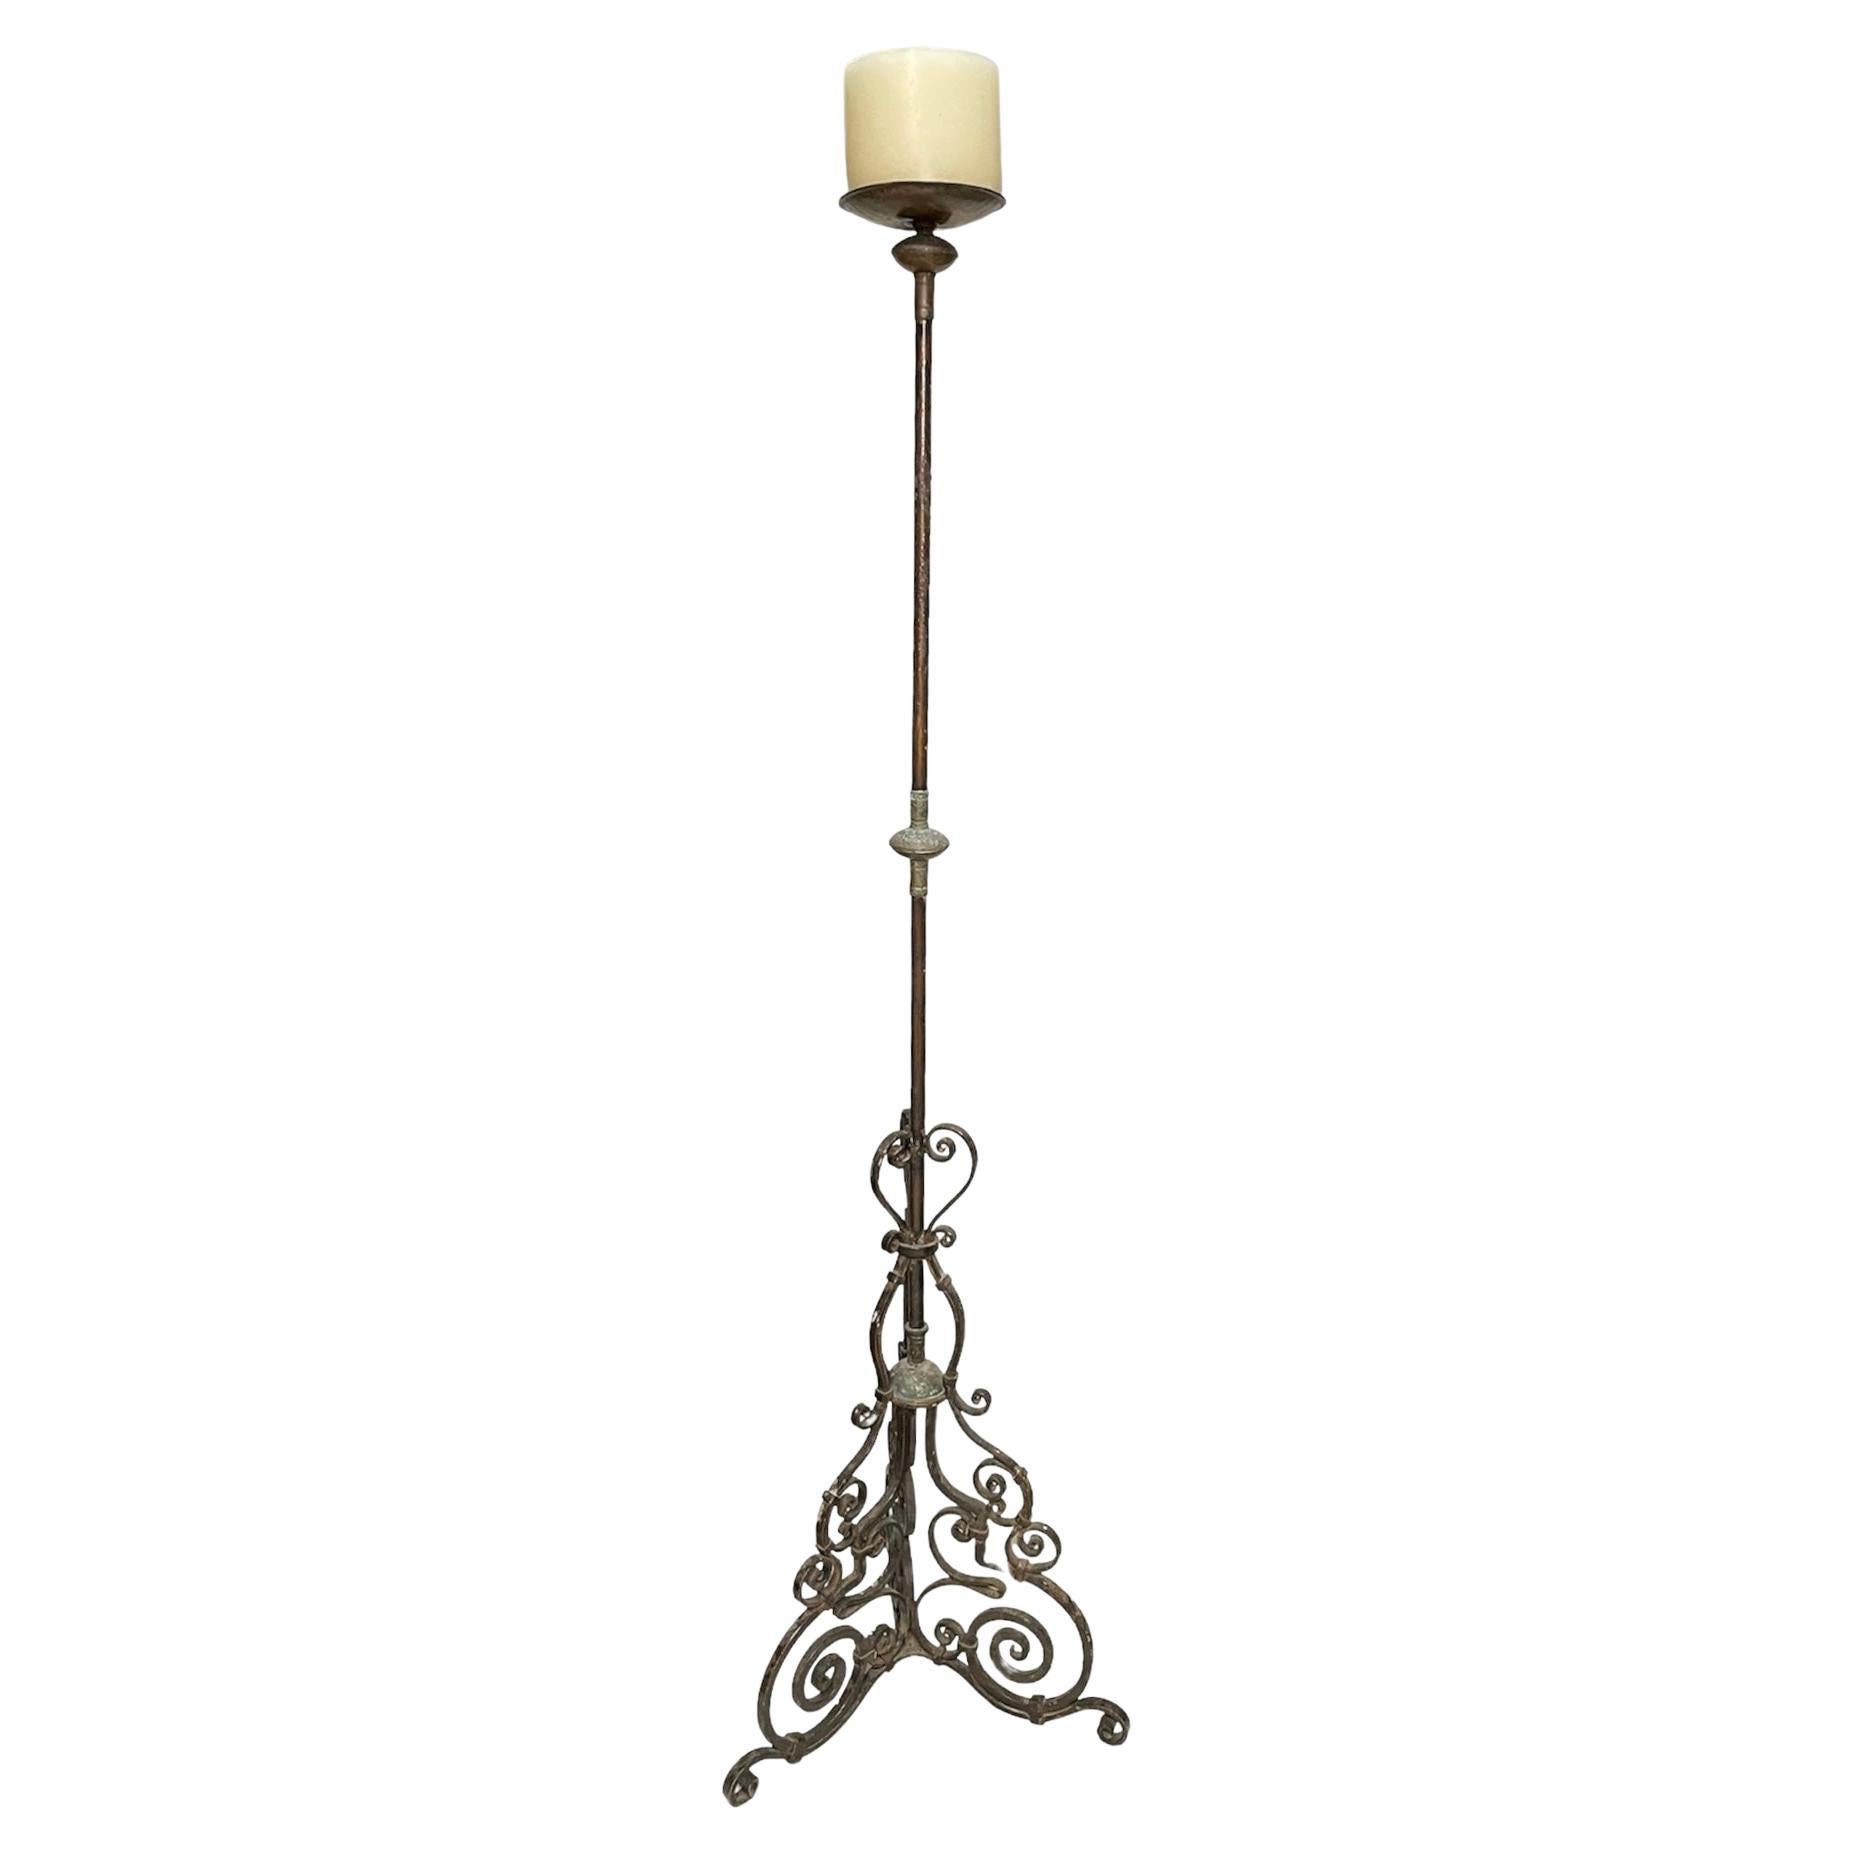 Gothic Style Wrought Iron Candle holder/Torchere For Sale